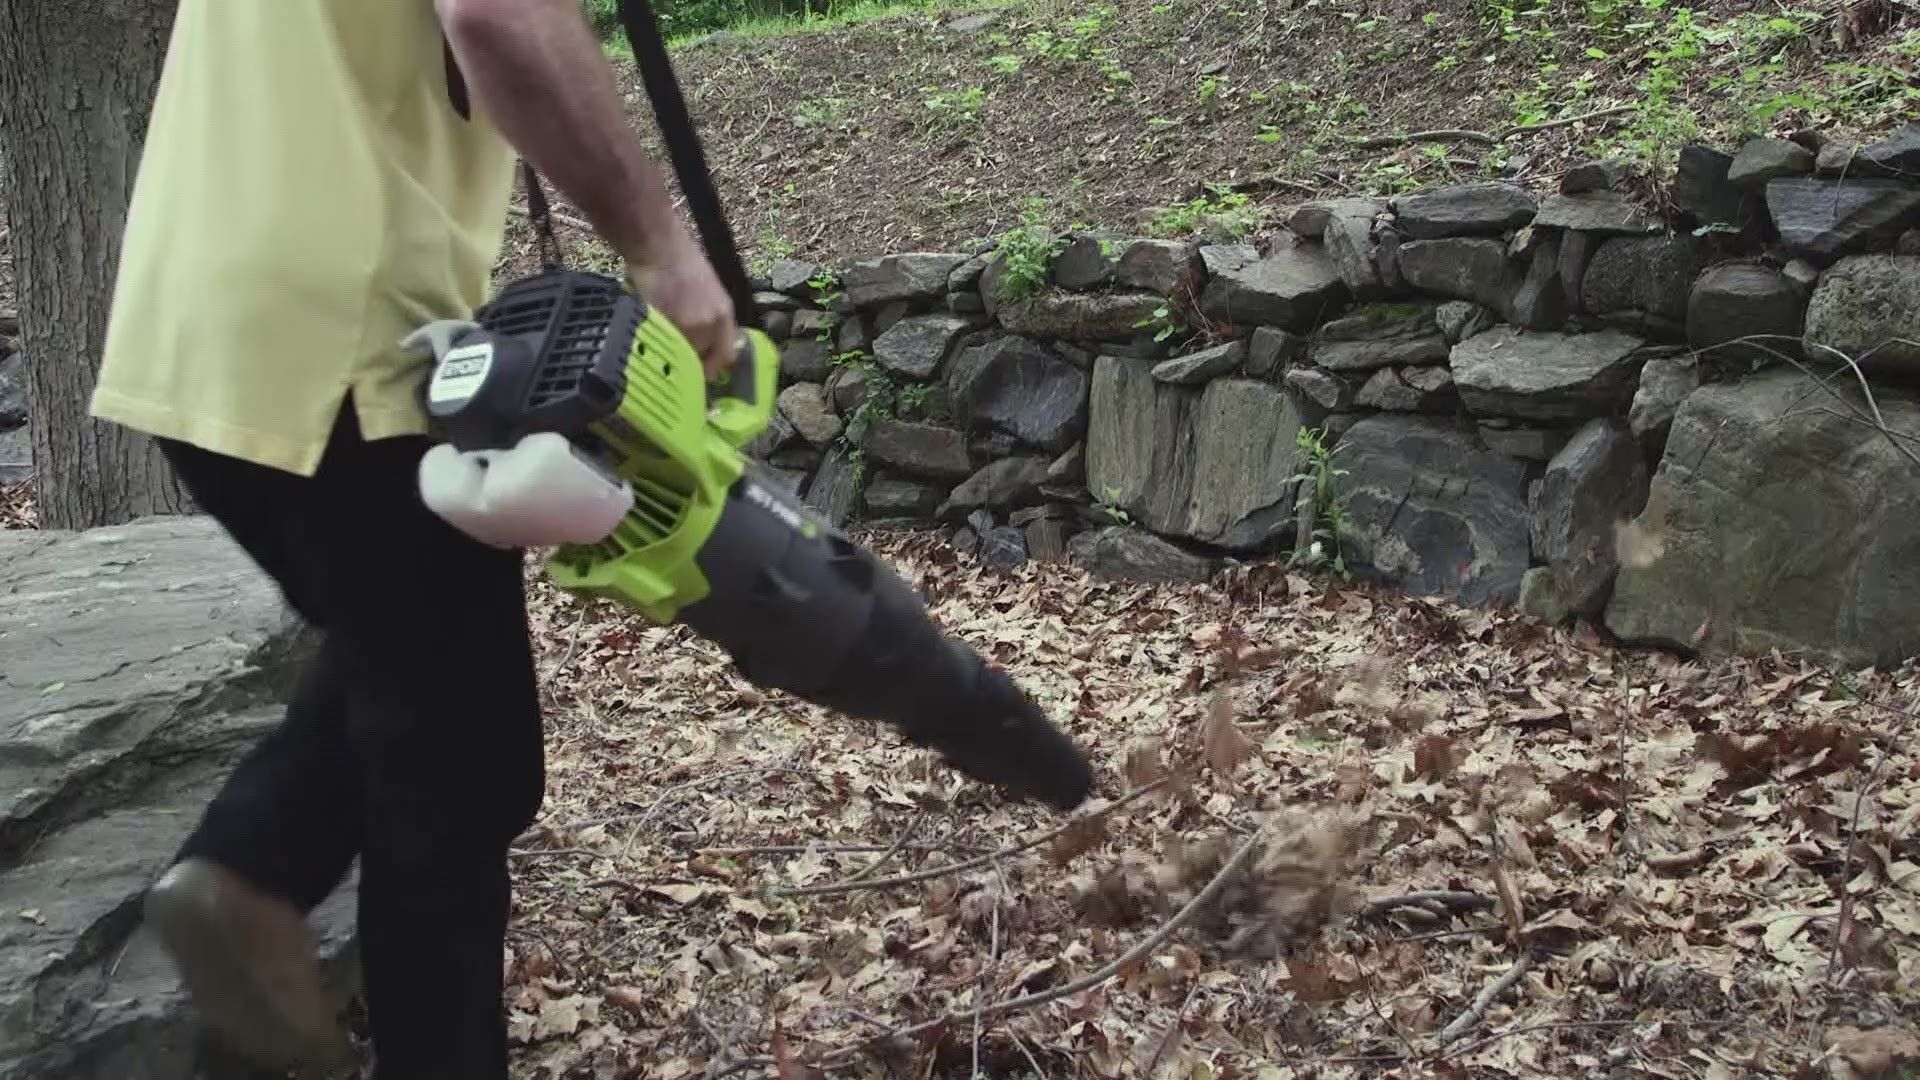 Consumer Reports reveals the top tools that are great for your yard and the planet.